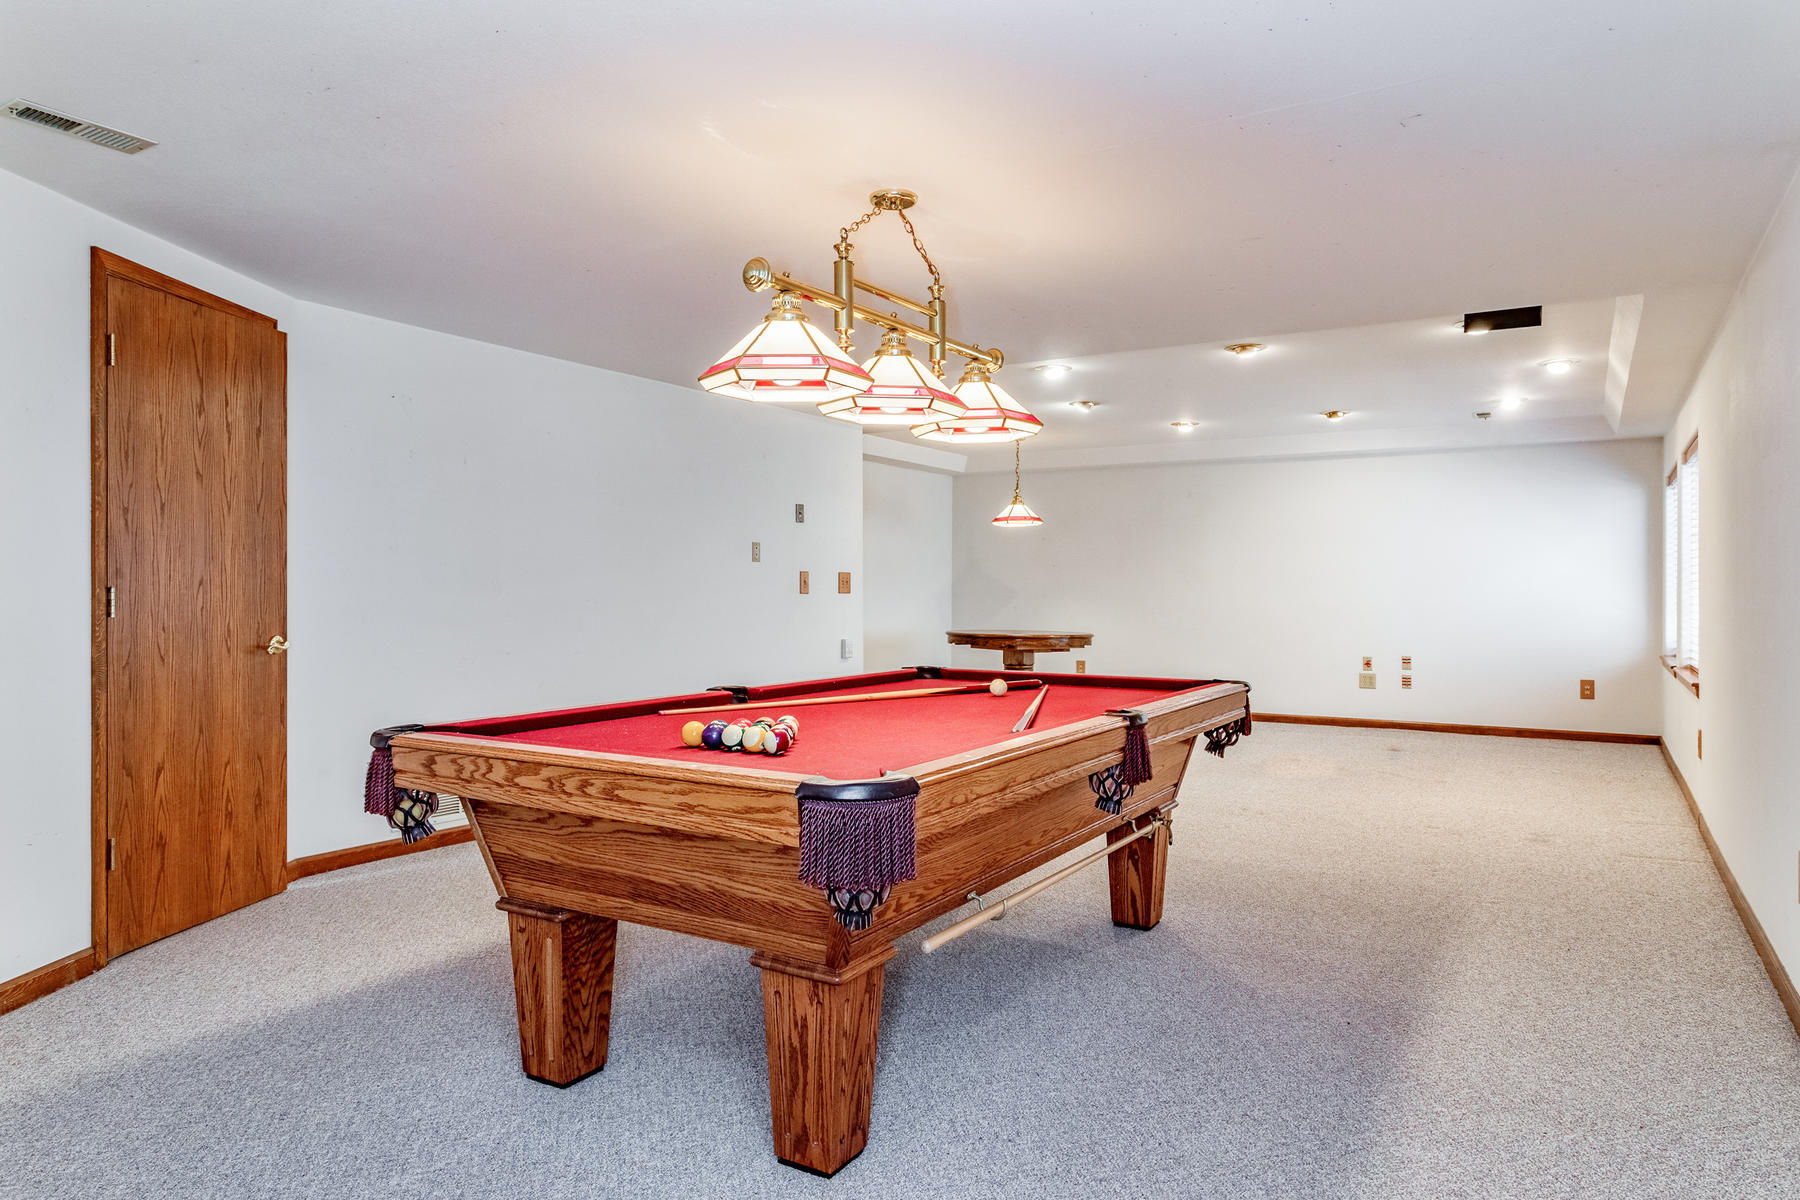 Full Finished Basement for Expanded Living Space